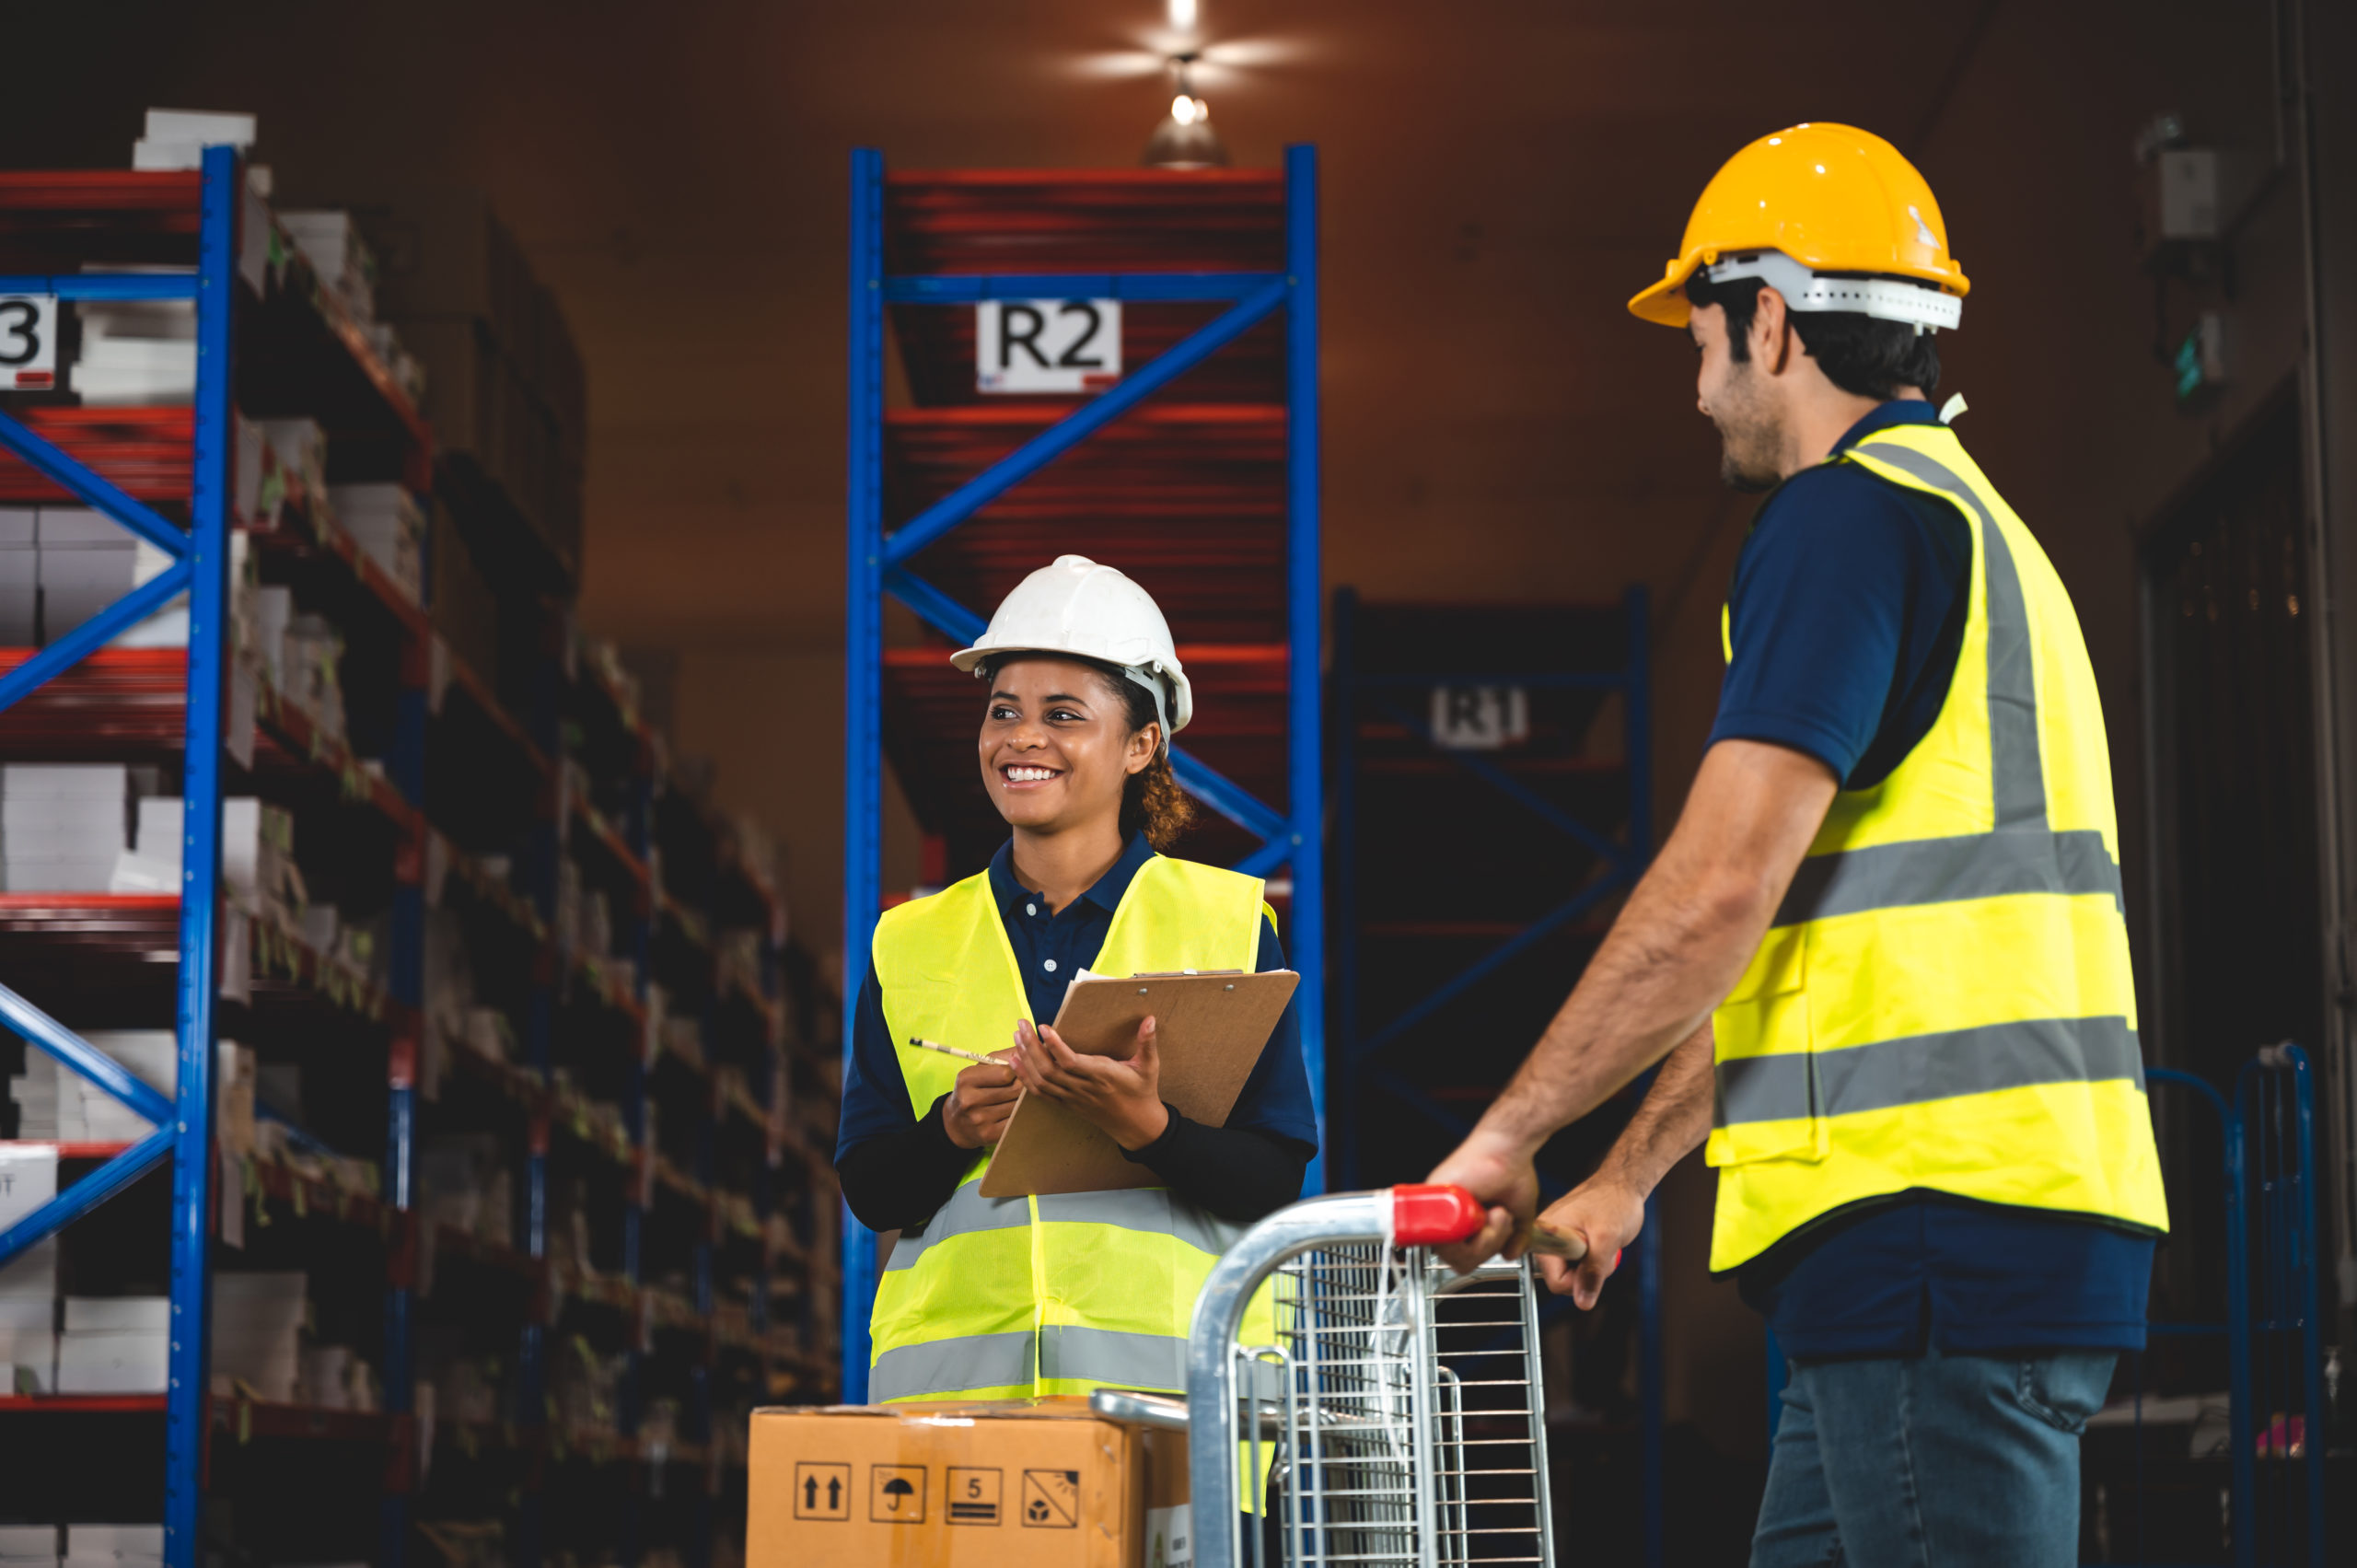 Employee Engagement: Two warehouse workers are speaking, wearing proper PPE for safety